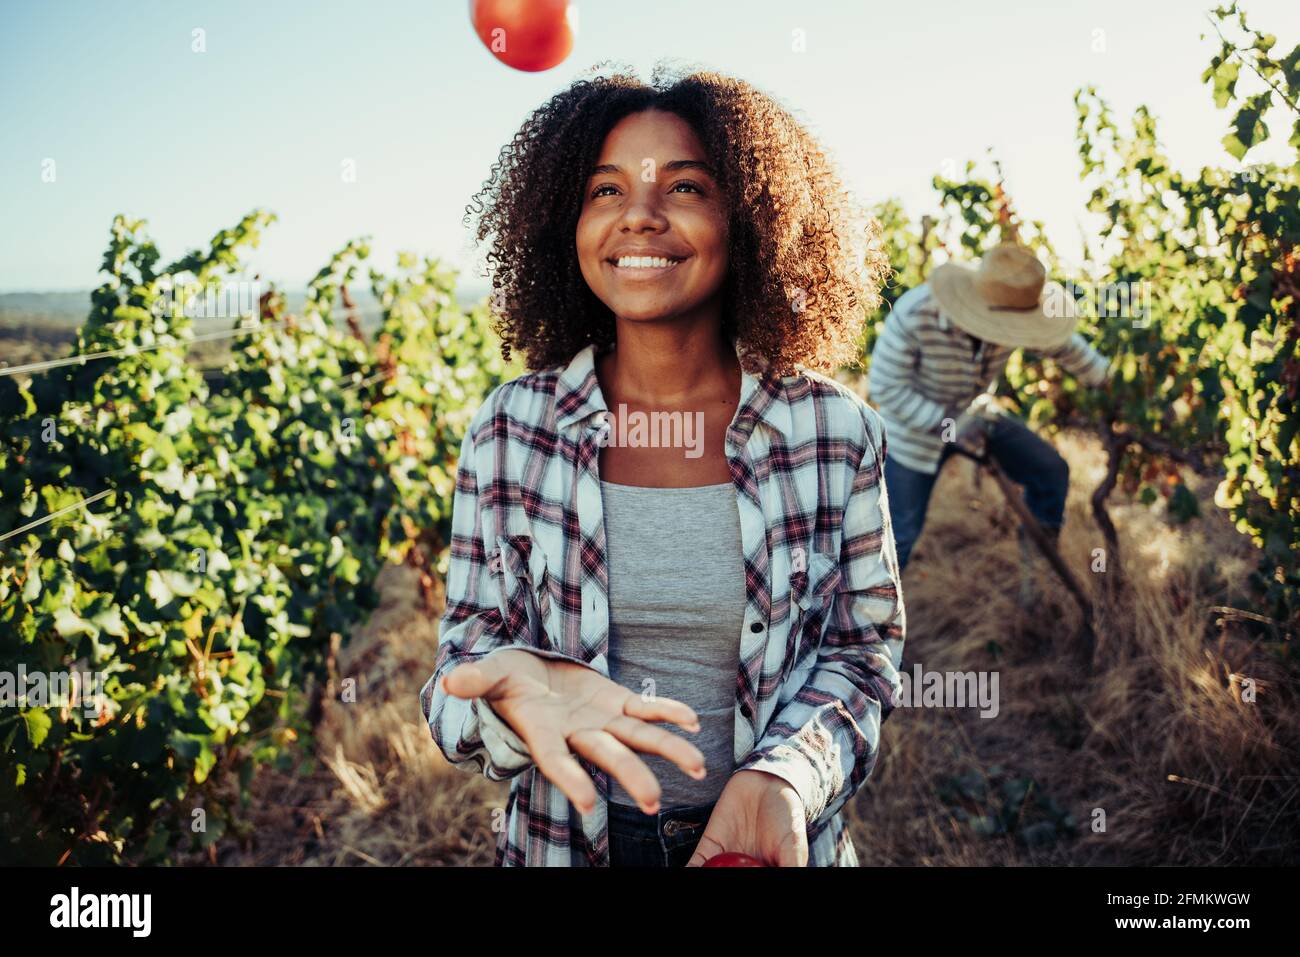 Mixed race female farmer playing with vegetables standing in vineyard  Stock Photo